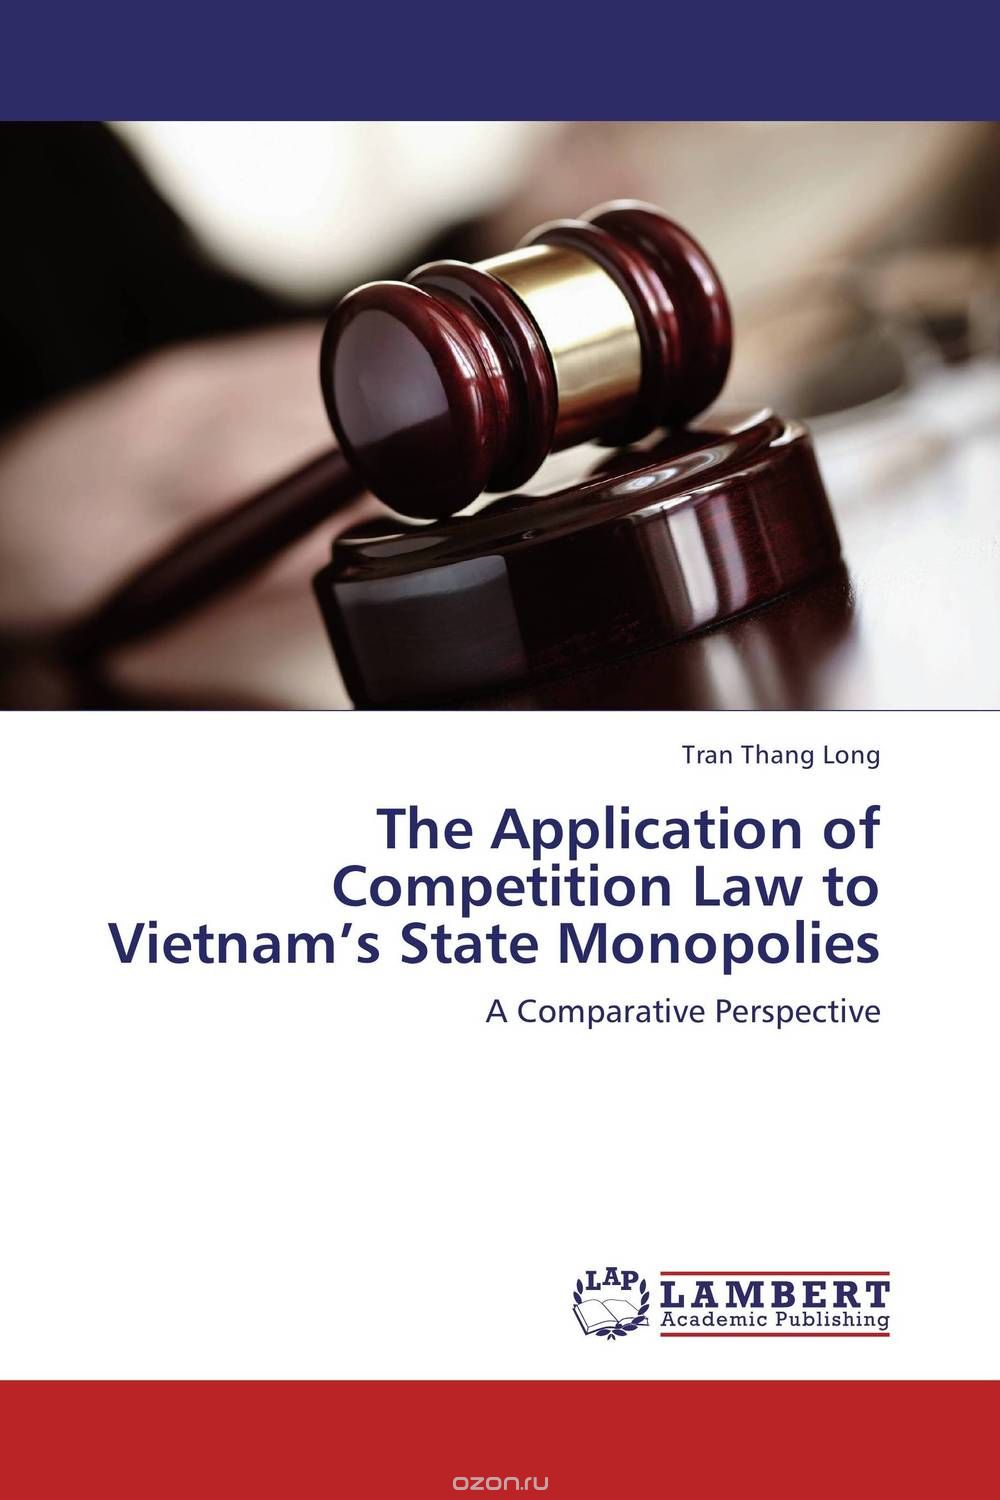 Скачать книгу "The Application of Competition Law to Vietnam’s State Monopolies"